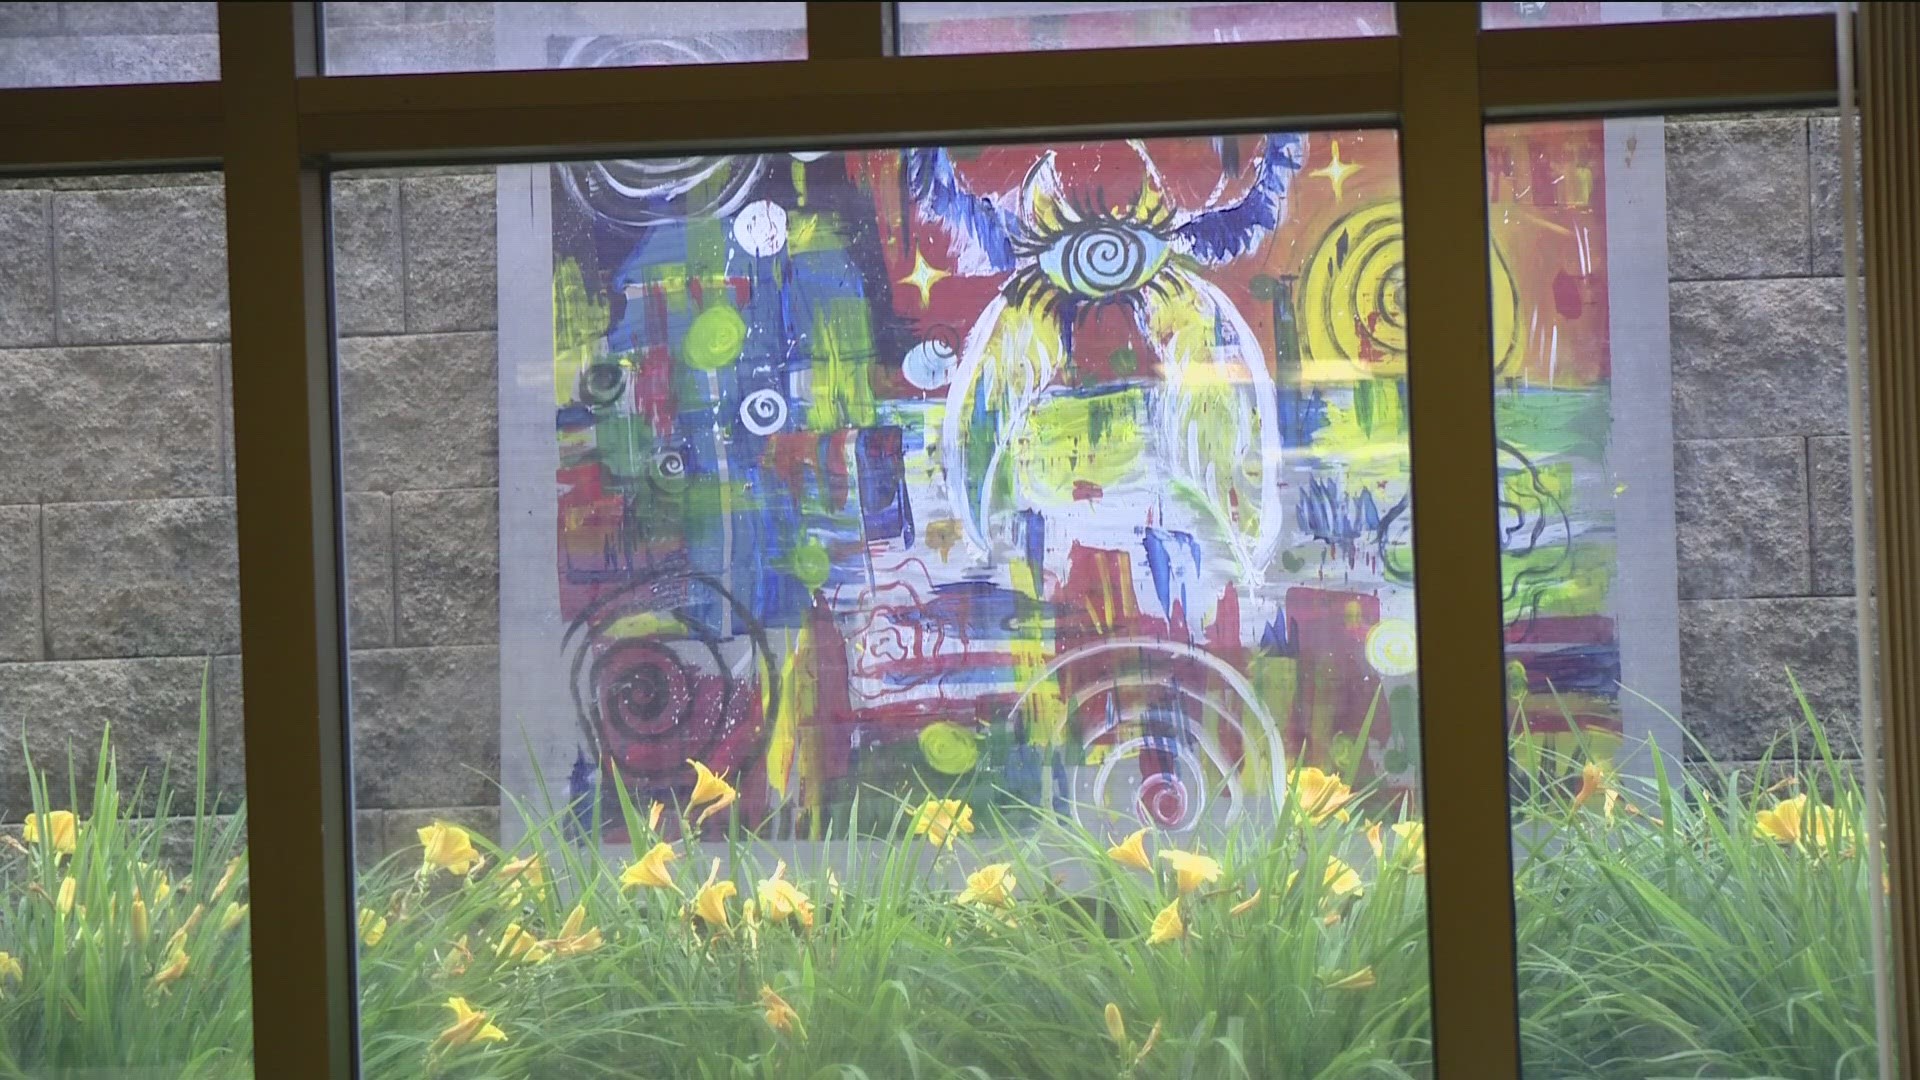 The student created murals "aim to uplift and inspire patients."